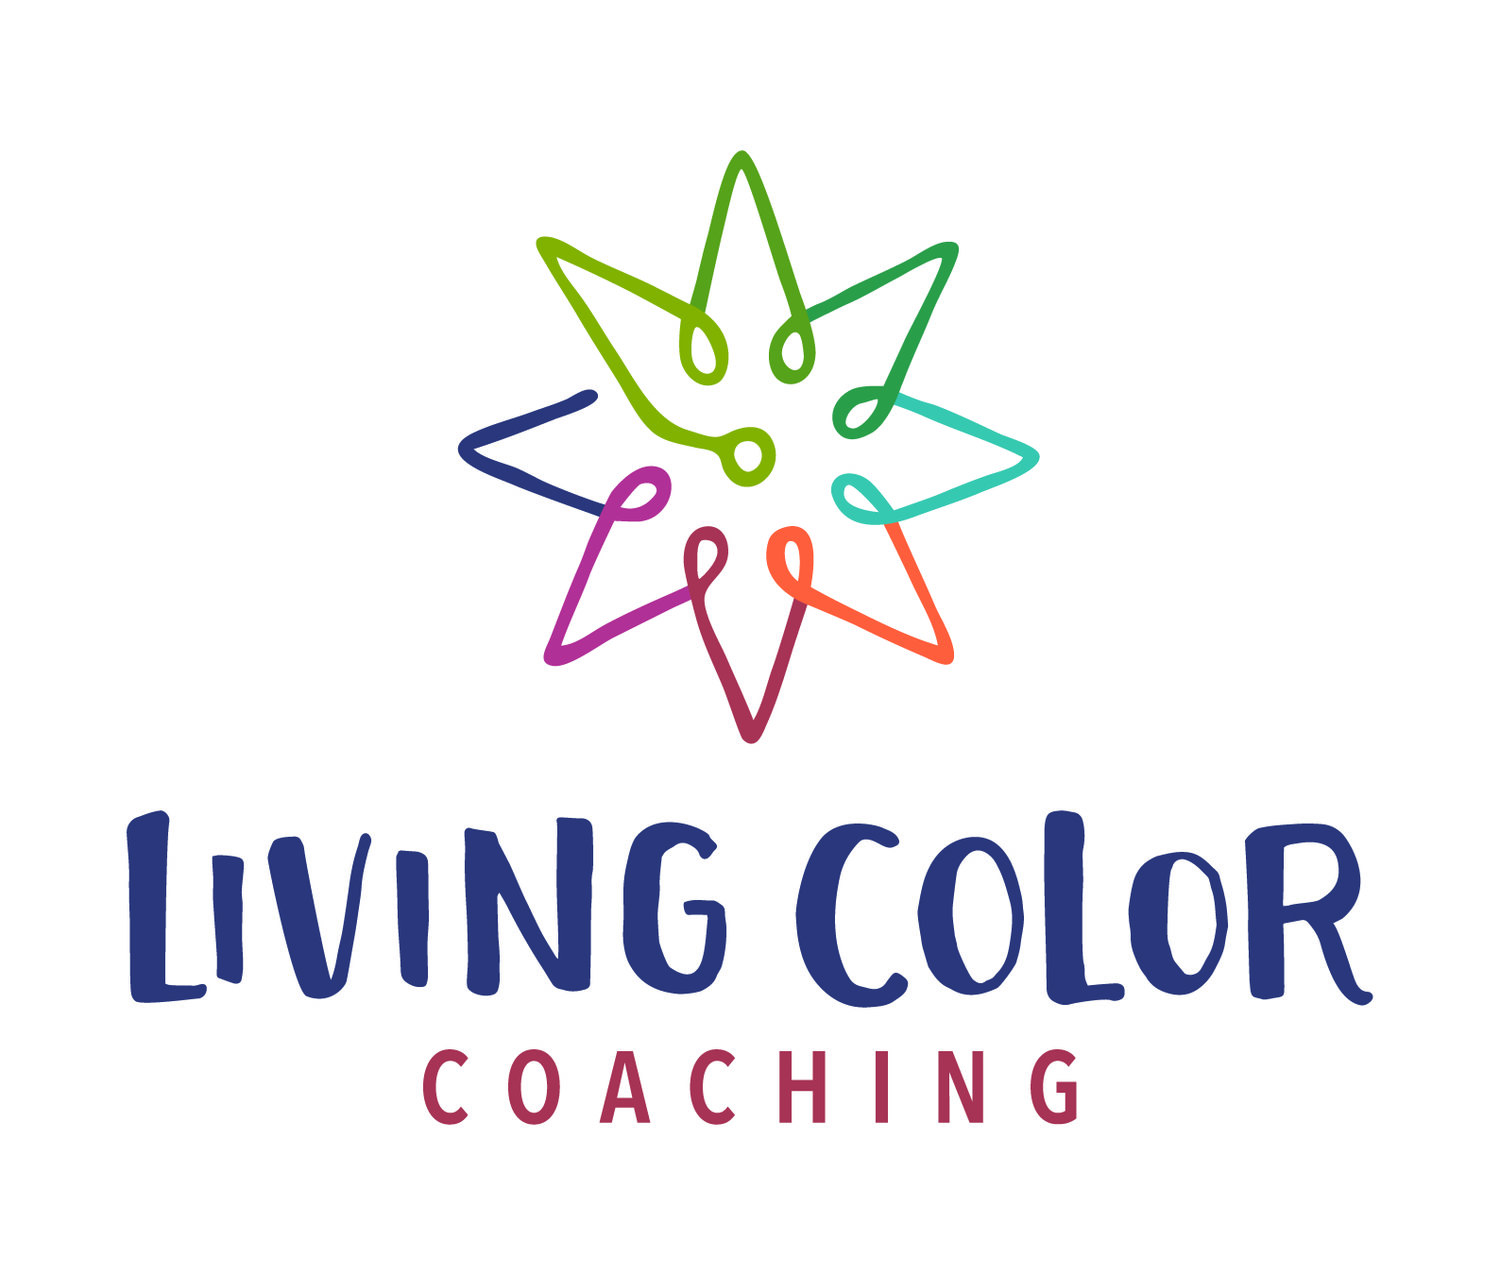 Living Color Coaching